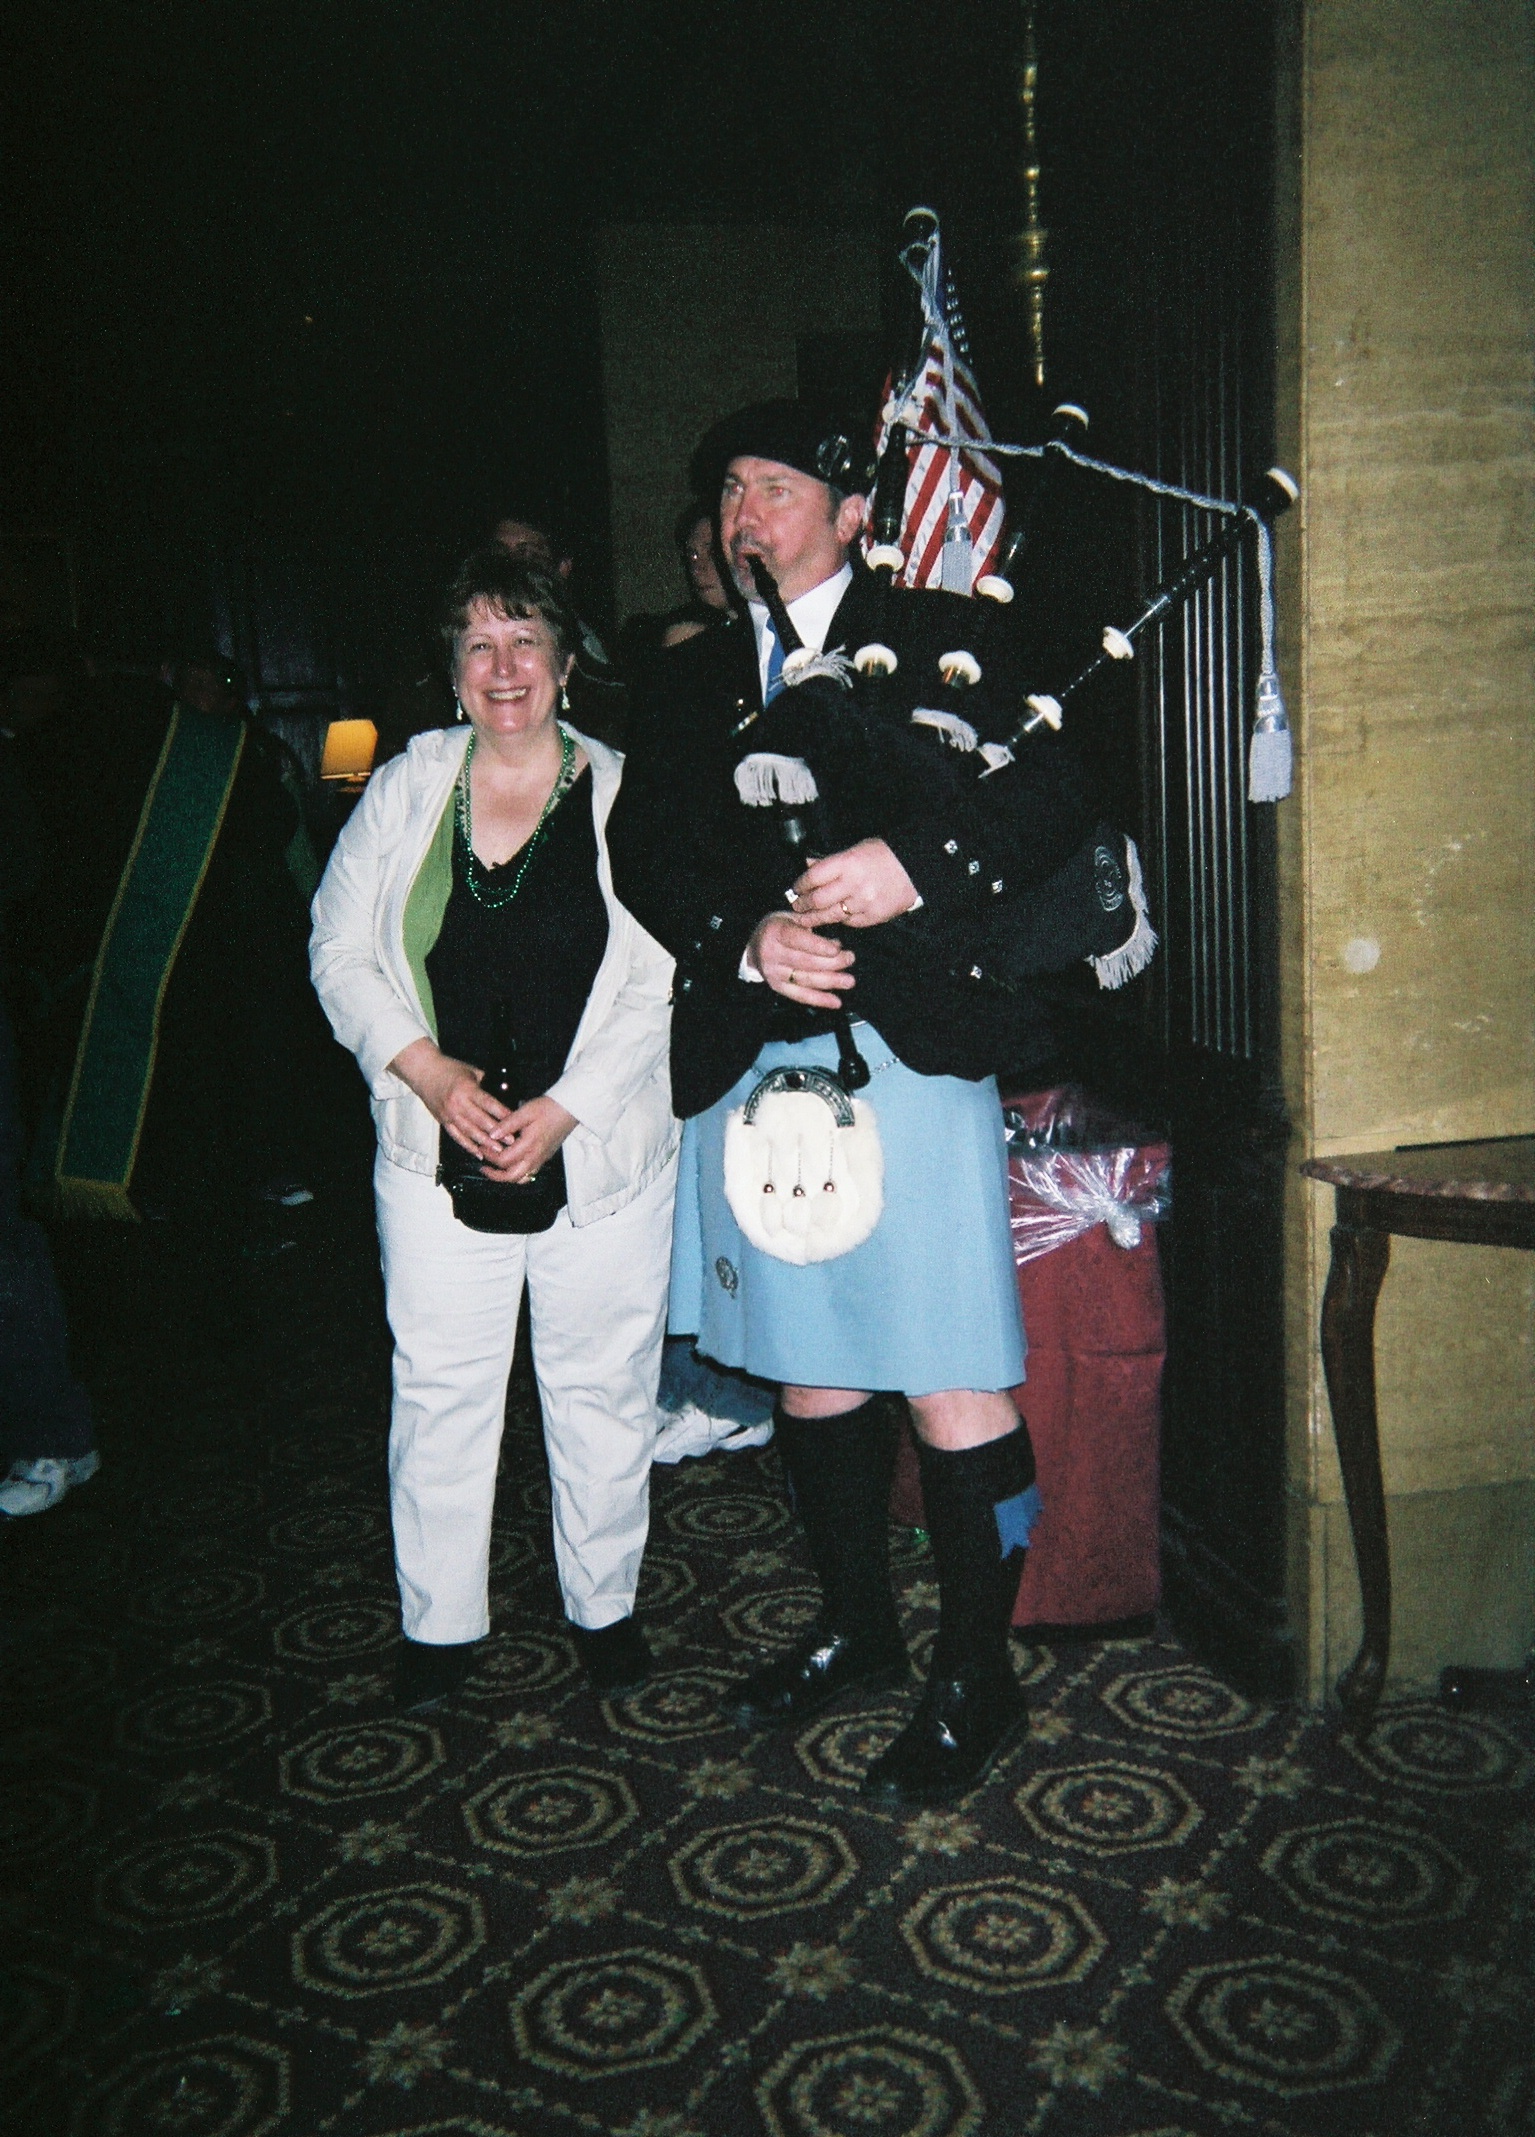 Marshymallow aka Mrs. Corny and Tim the Bagpiper at the Roosevelt Hotel during the St. Pat's Day Parade in NYC